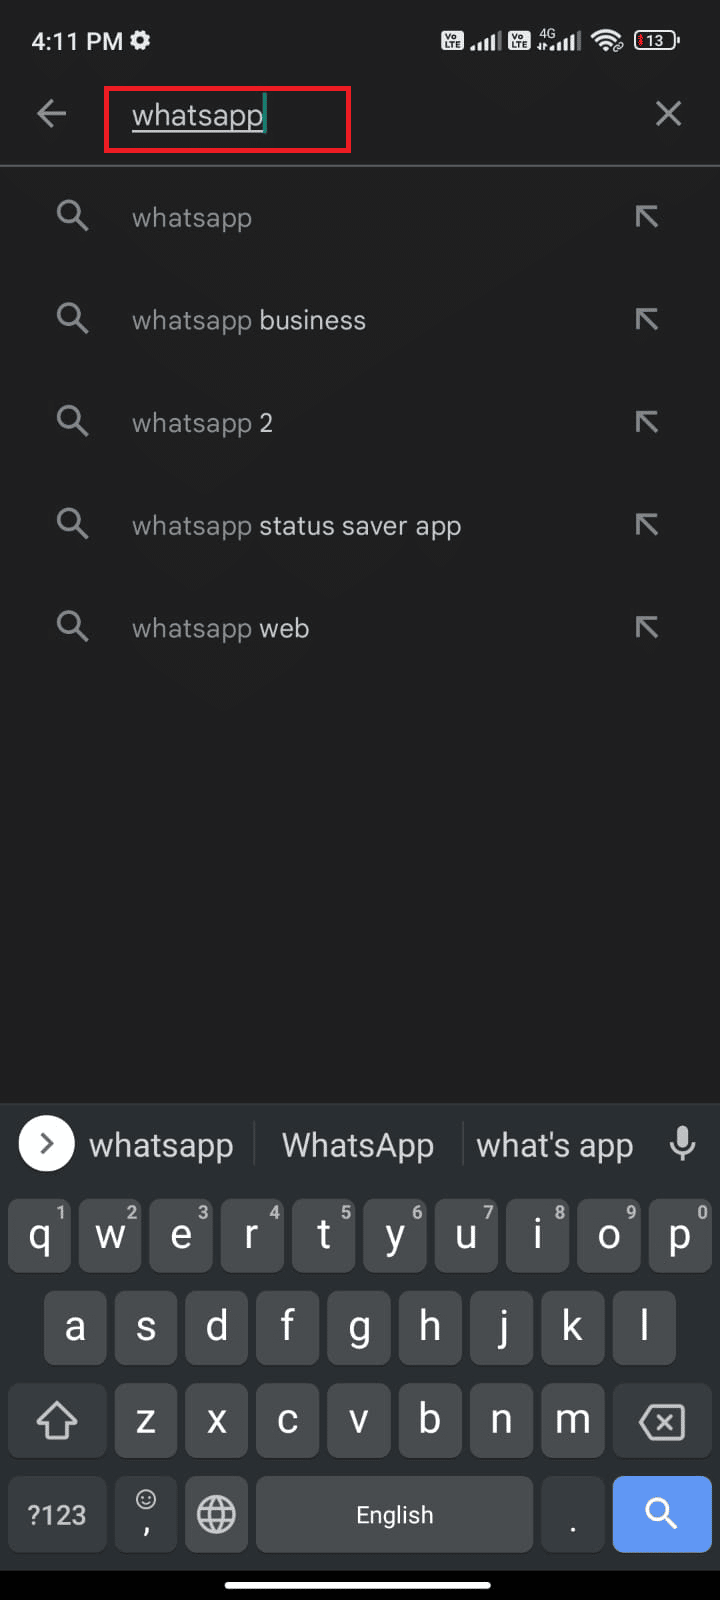 Go to Play Store as you did earlier and search WhatsApp. Fix WhatsApp Stopped Working Today on Android